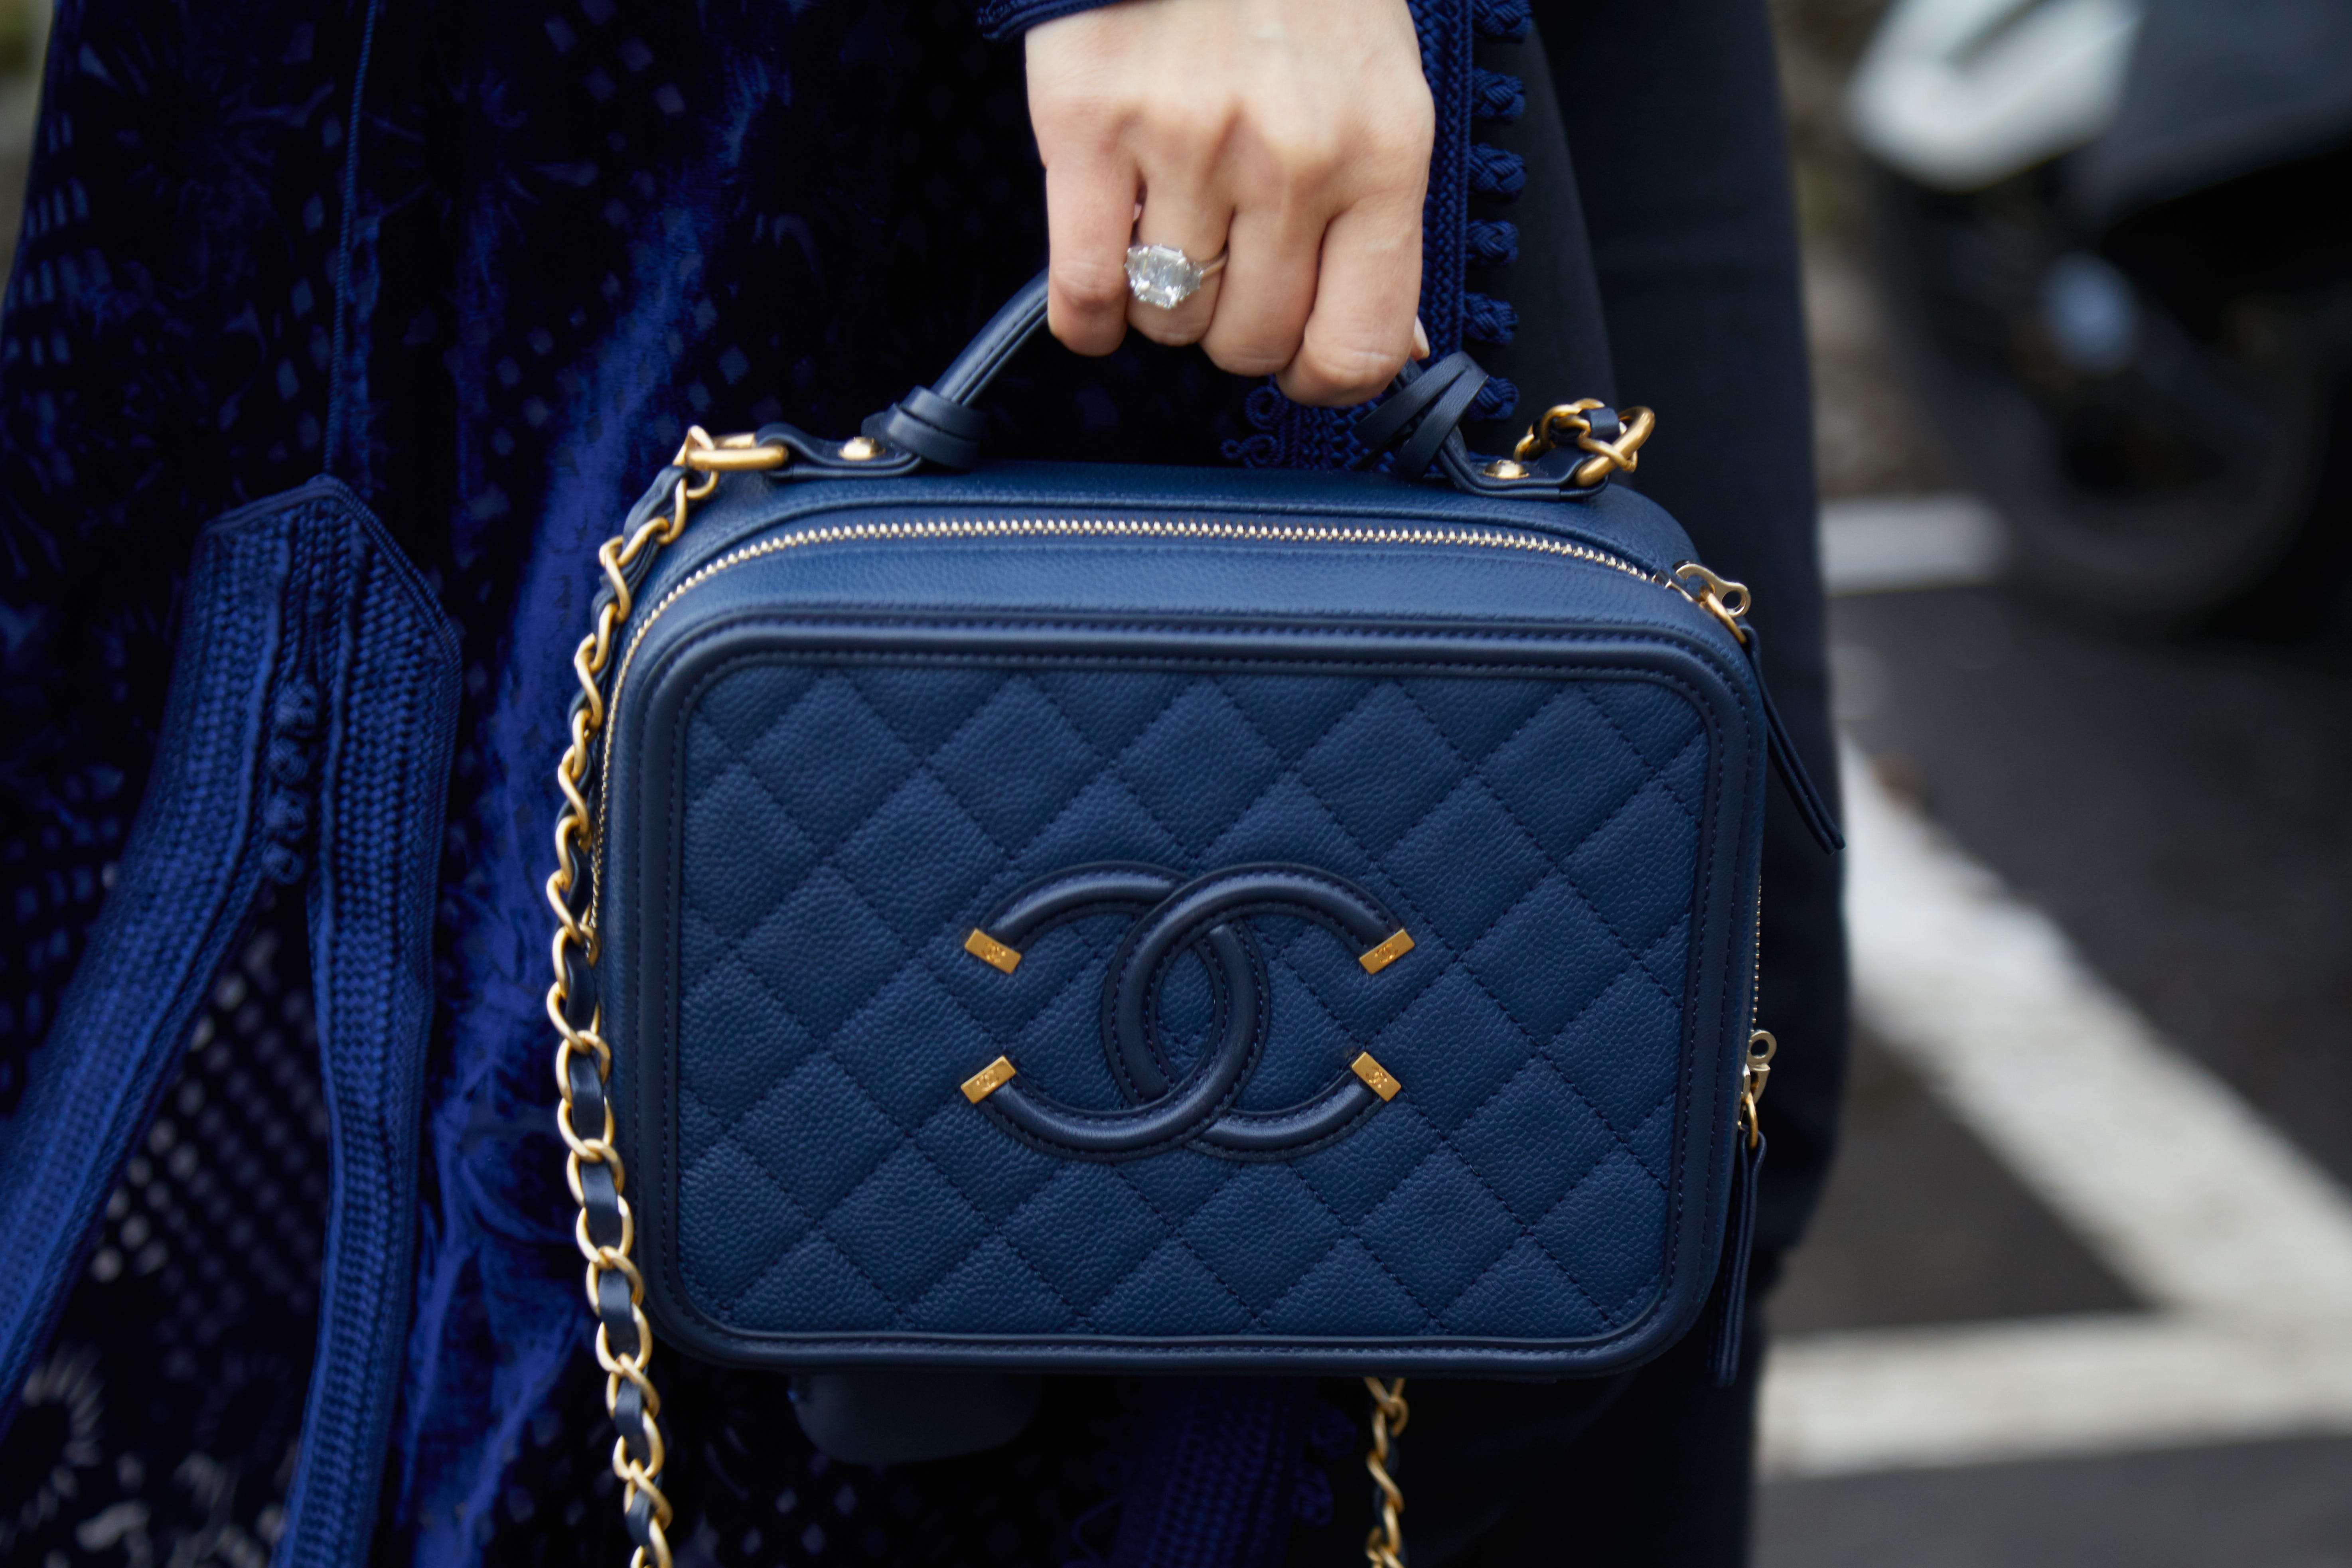 Designer handbags from Chanel will now cost more as the French